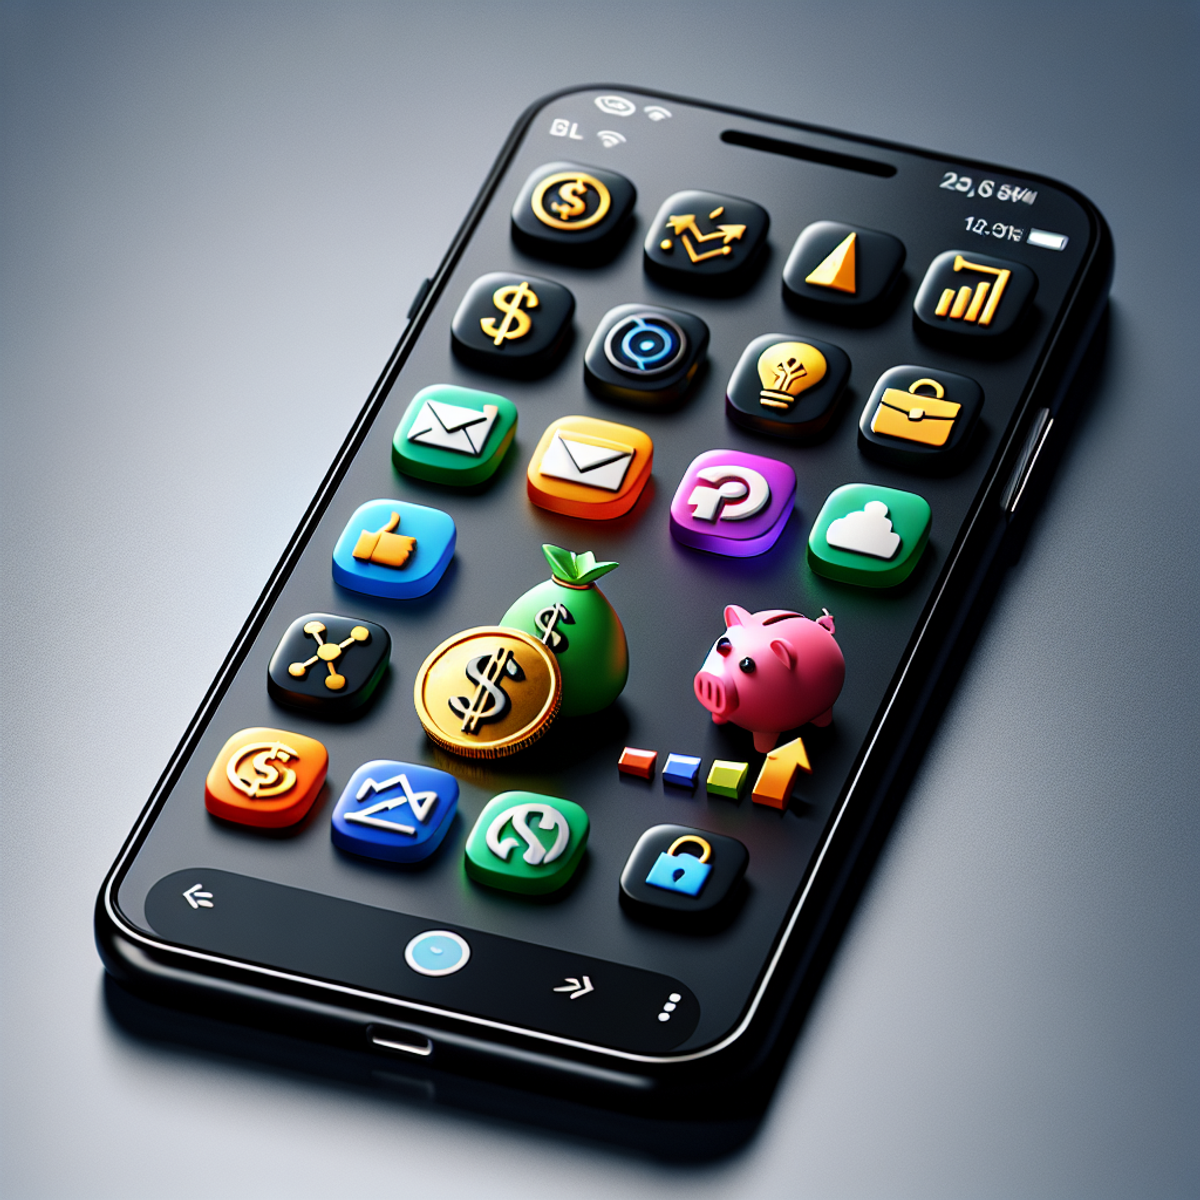 Smartphone displaying various finance-related app icons for generating passive income.